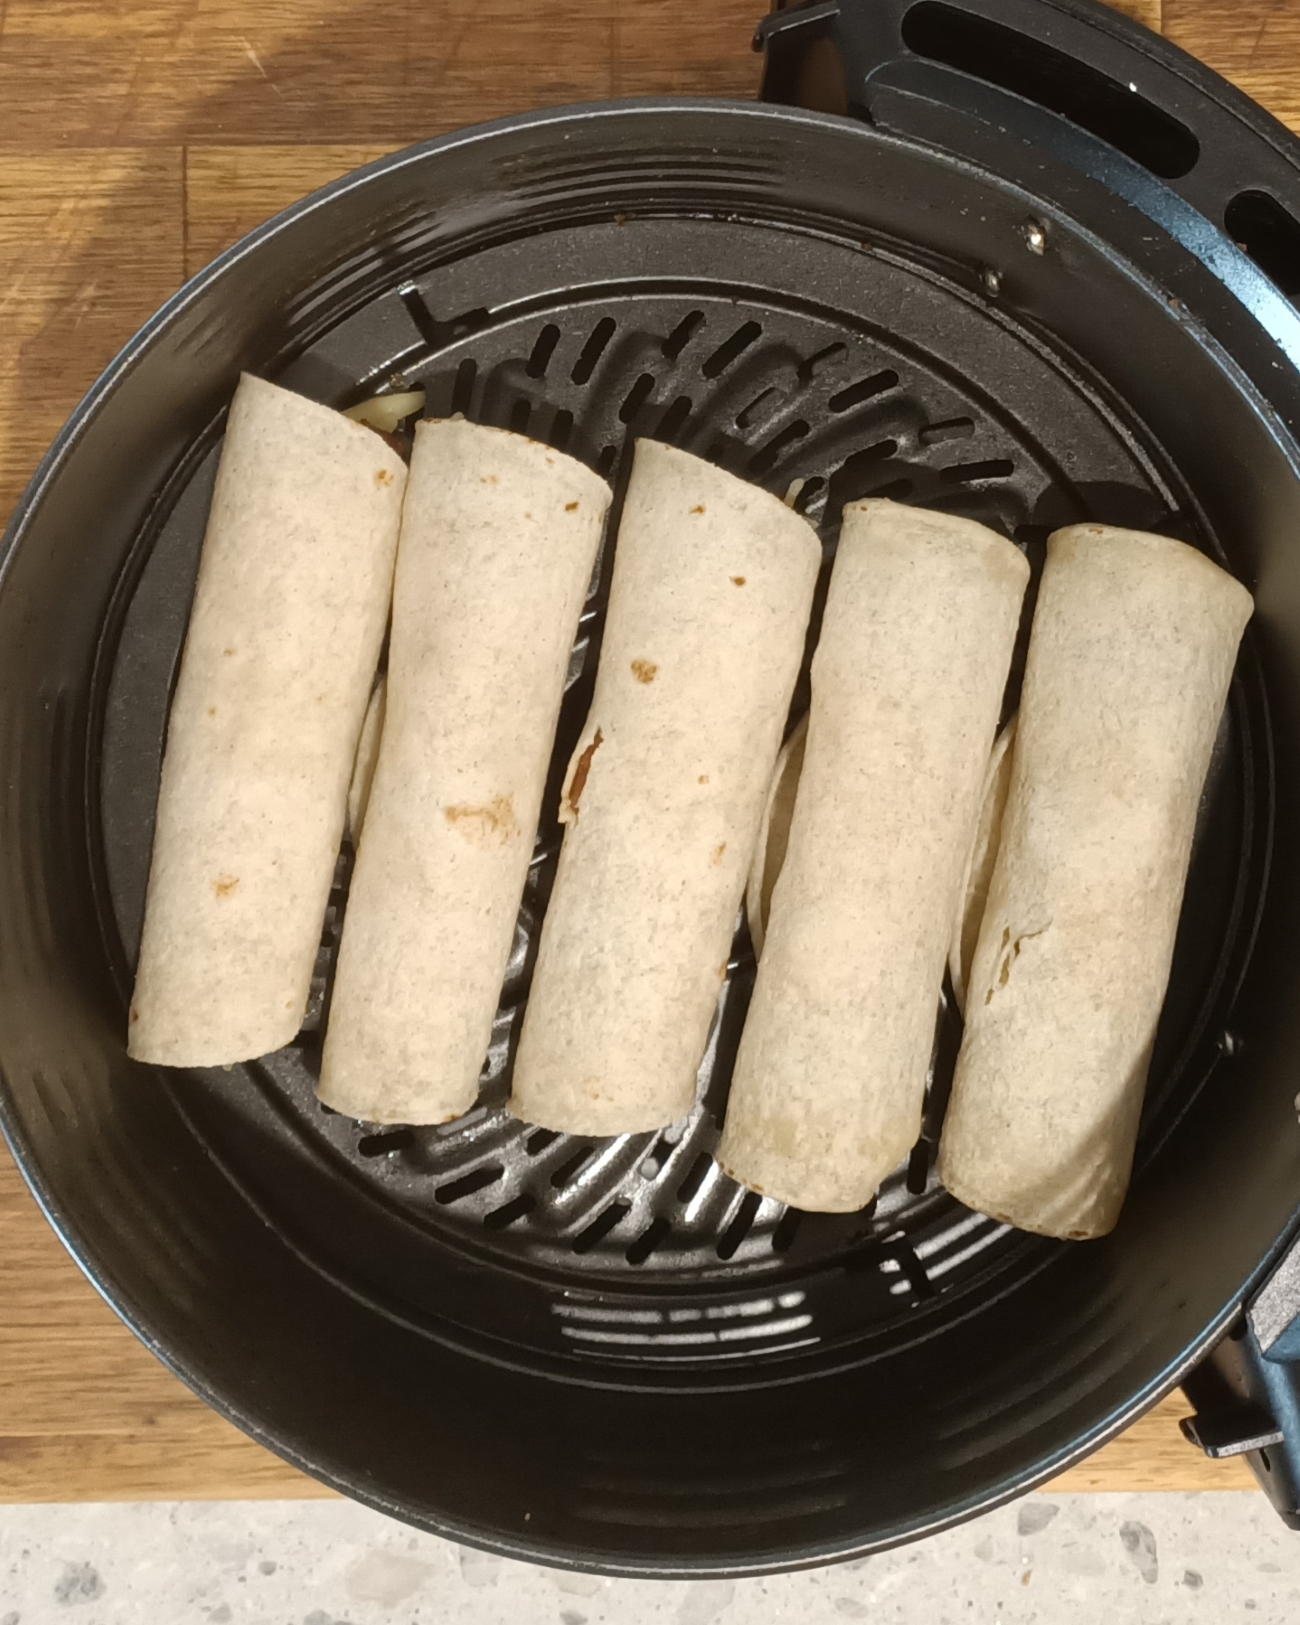 Roll and Place into Air Fryer 1